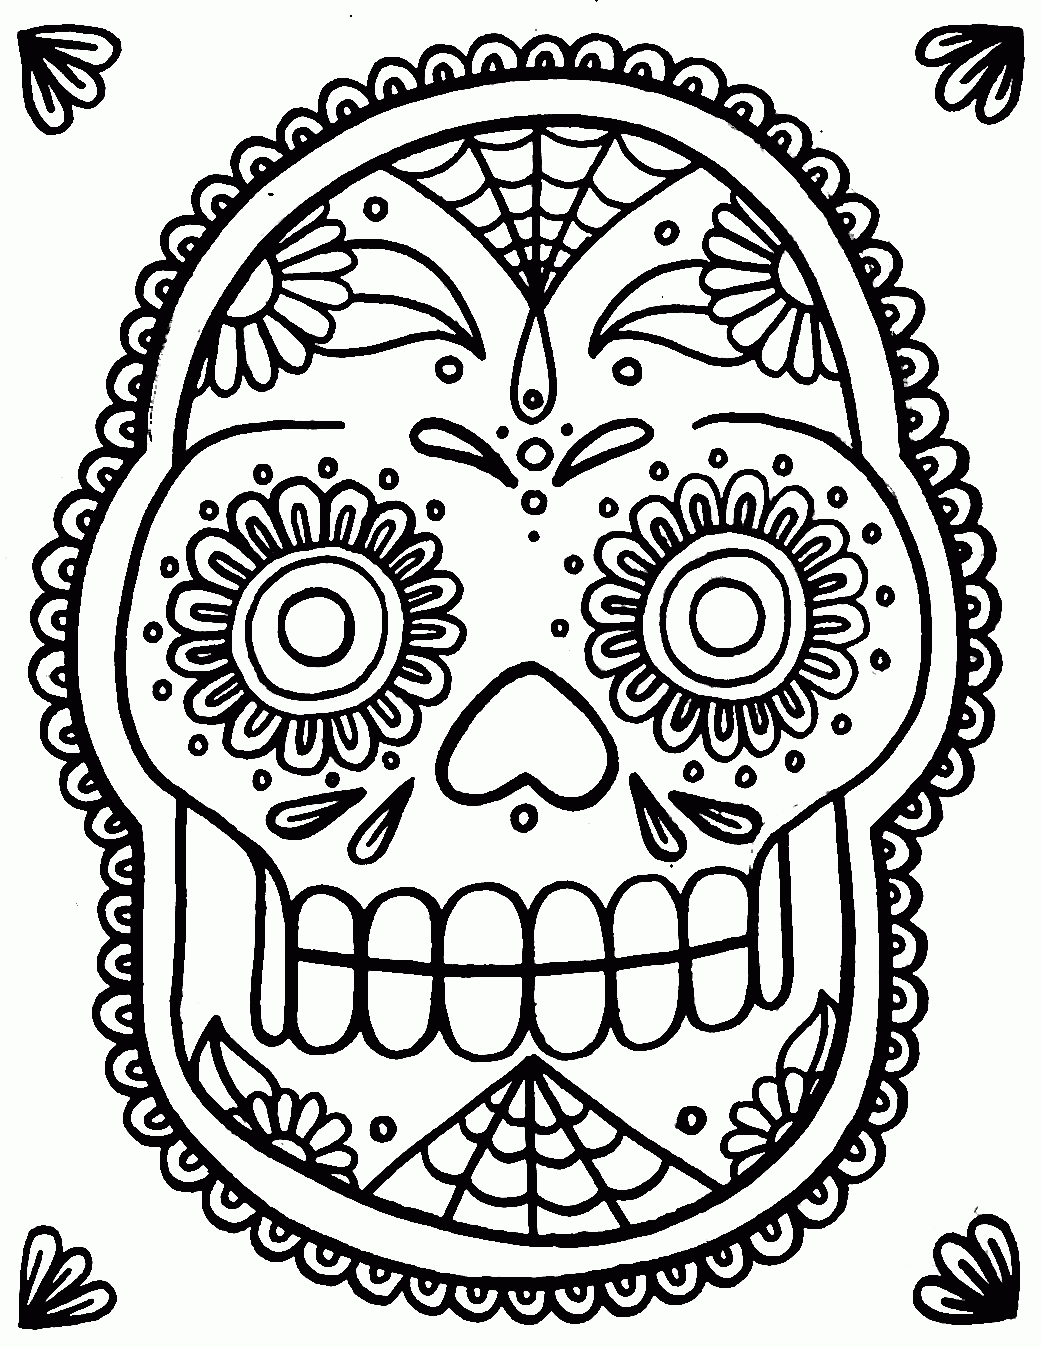 Download Simple Sugar Skull Coloring Pages - Coloring Home